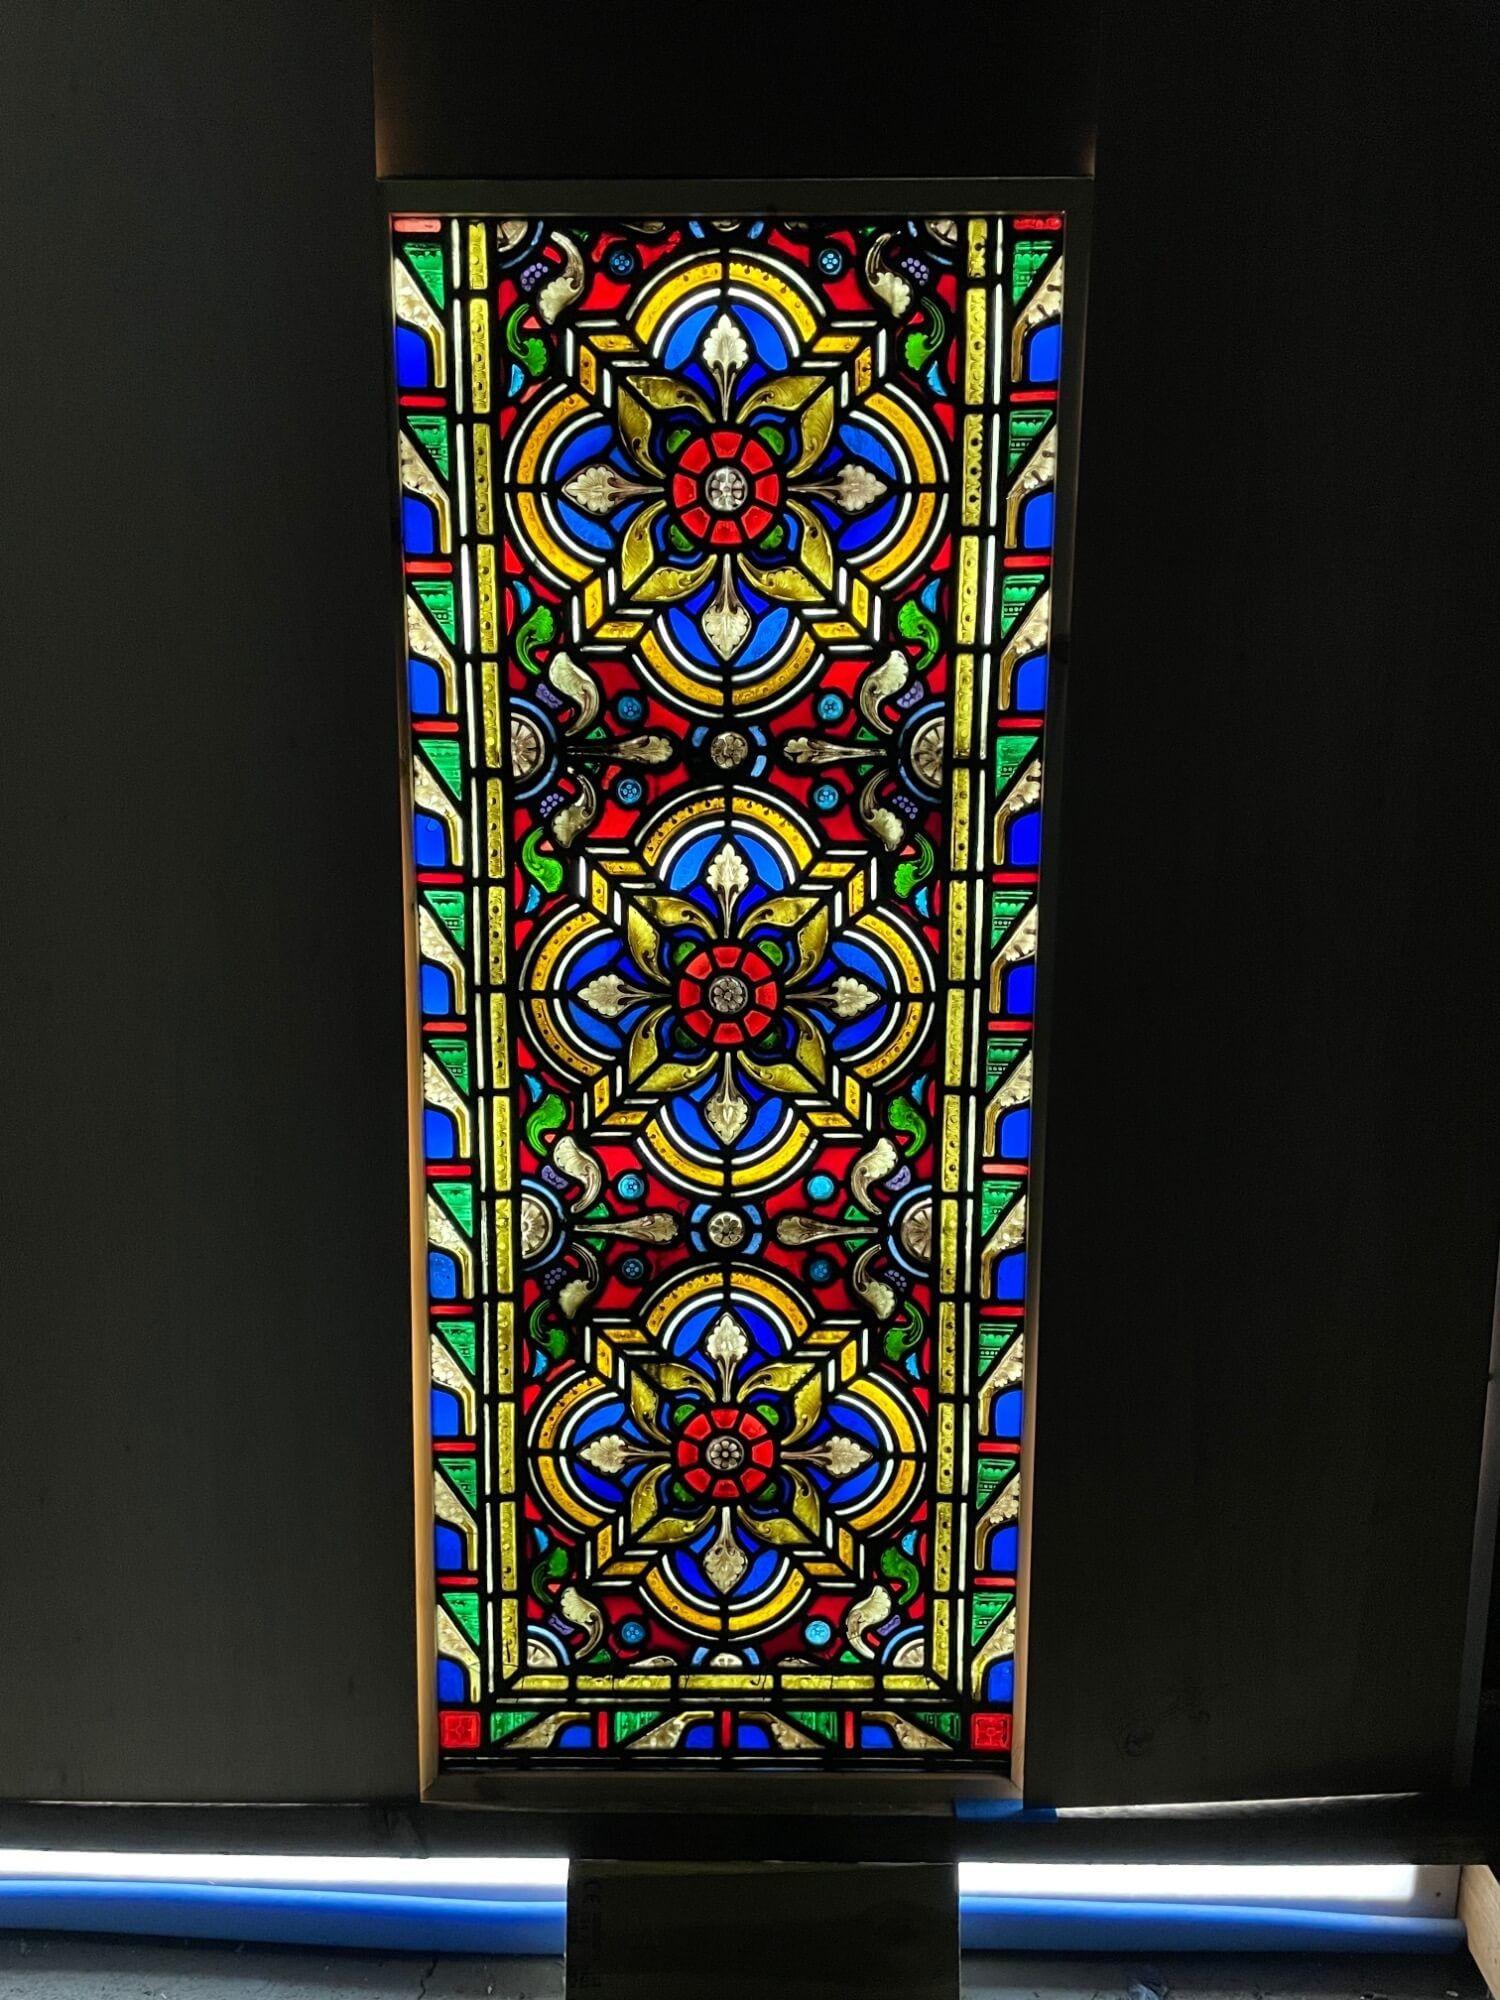 A large antique Victorian late 19th century stained glass window, originally from a church in northern England. Three hand painted detailed flowers, thought to be a stylised Tudor Rose design, sit at the heart of this piece. It incorporates both